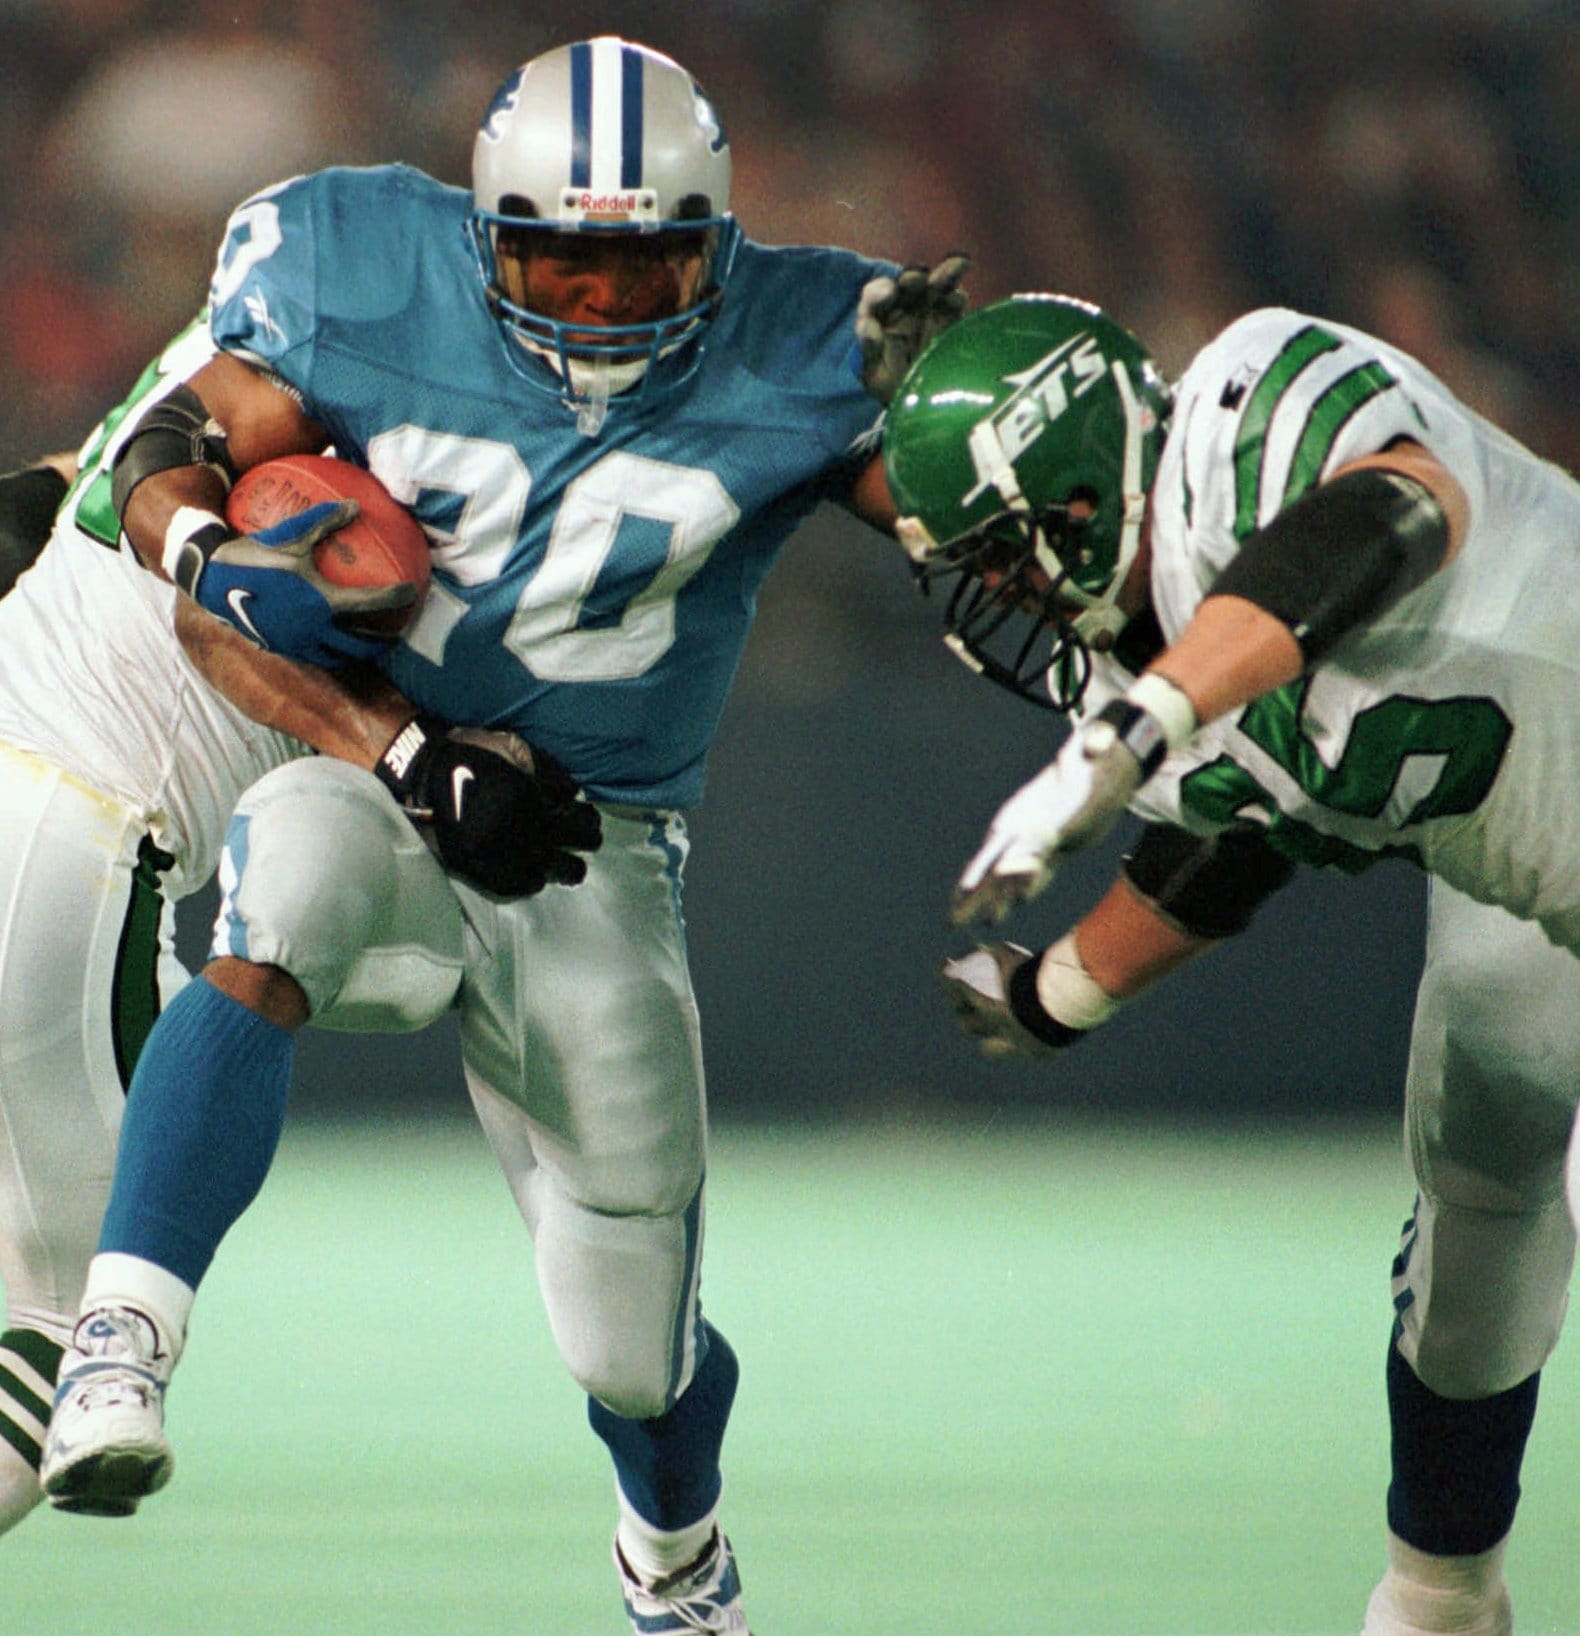 Detroit Lions running back Barry Sanders carries the ball during a game against the New York Jets in 1997.